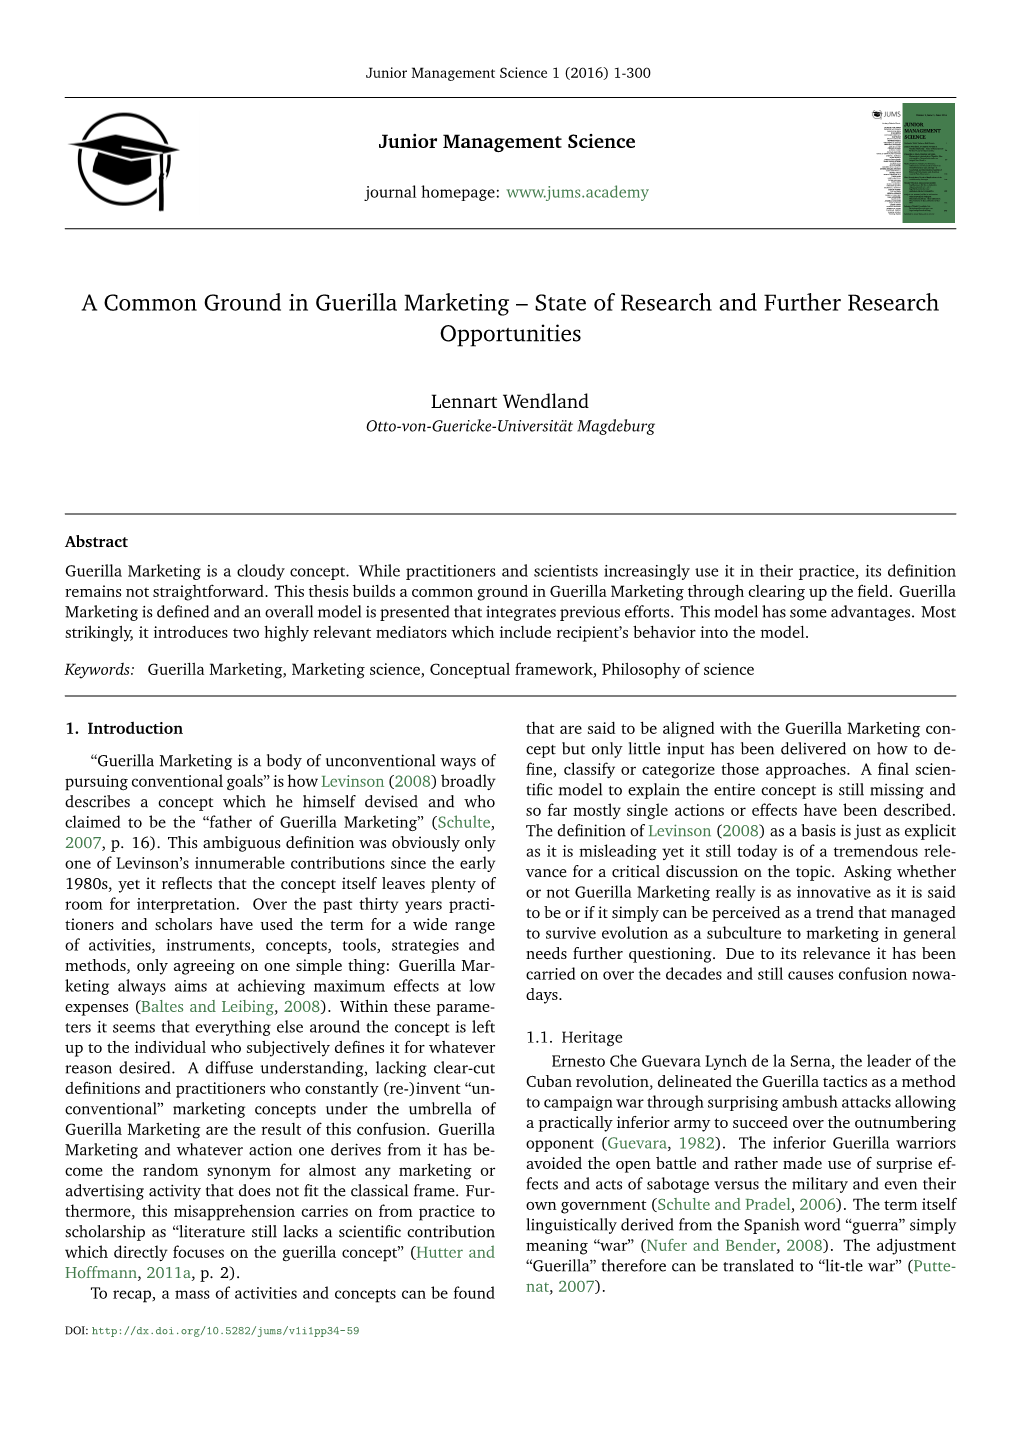 A Common Ground in Guerilla Marketing – State of Research and Further Research Opportunities